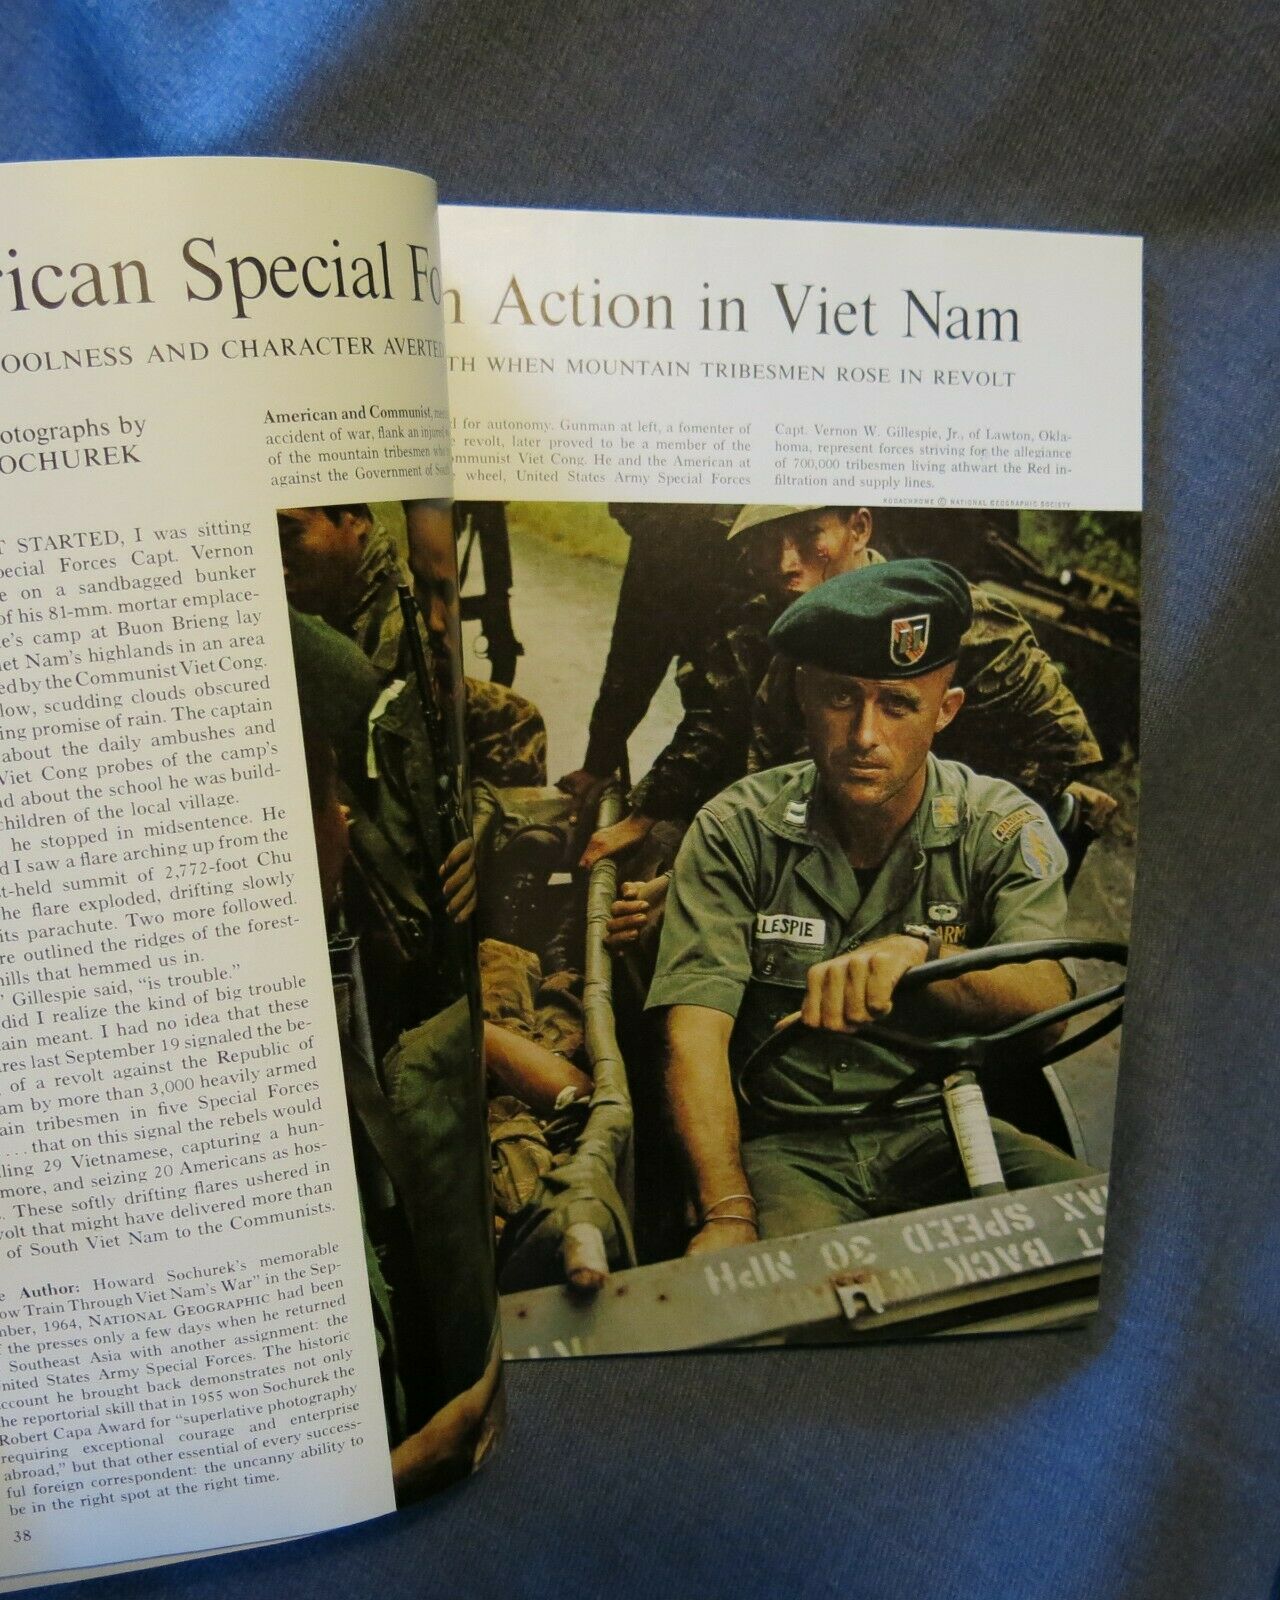 VIETNAM WAR -- US ARMY SPECIAL FORCES -- NATIONAL GEOGRAPHIC - JAN 1965